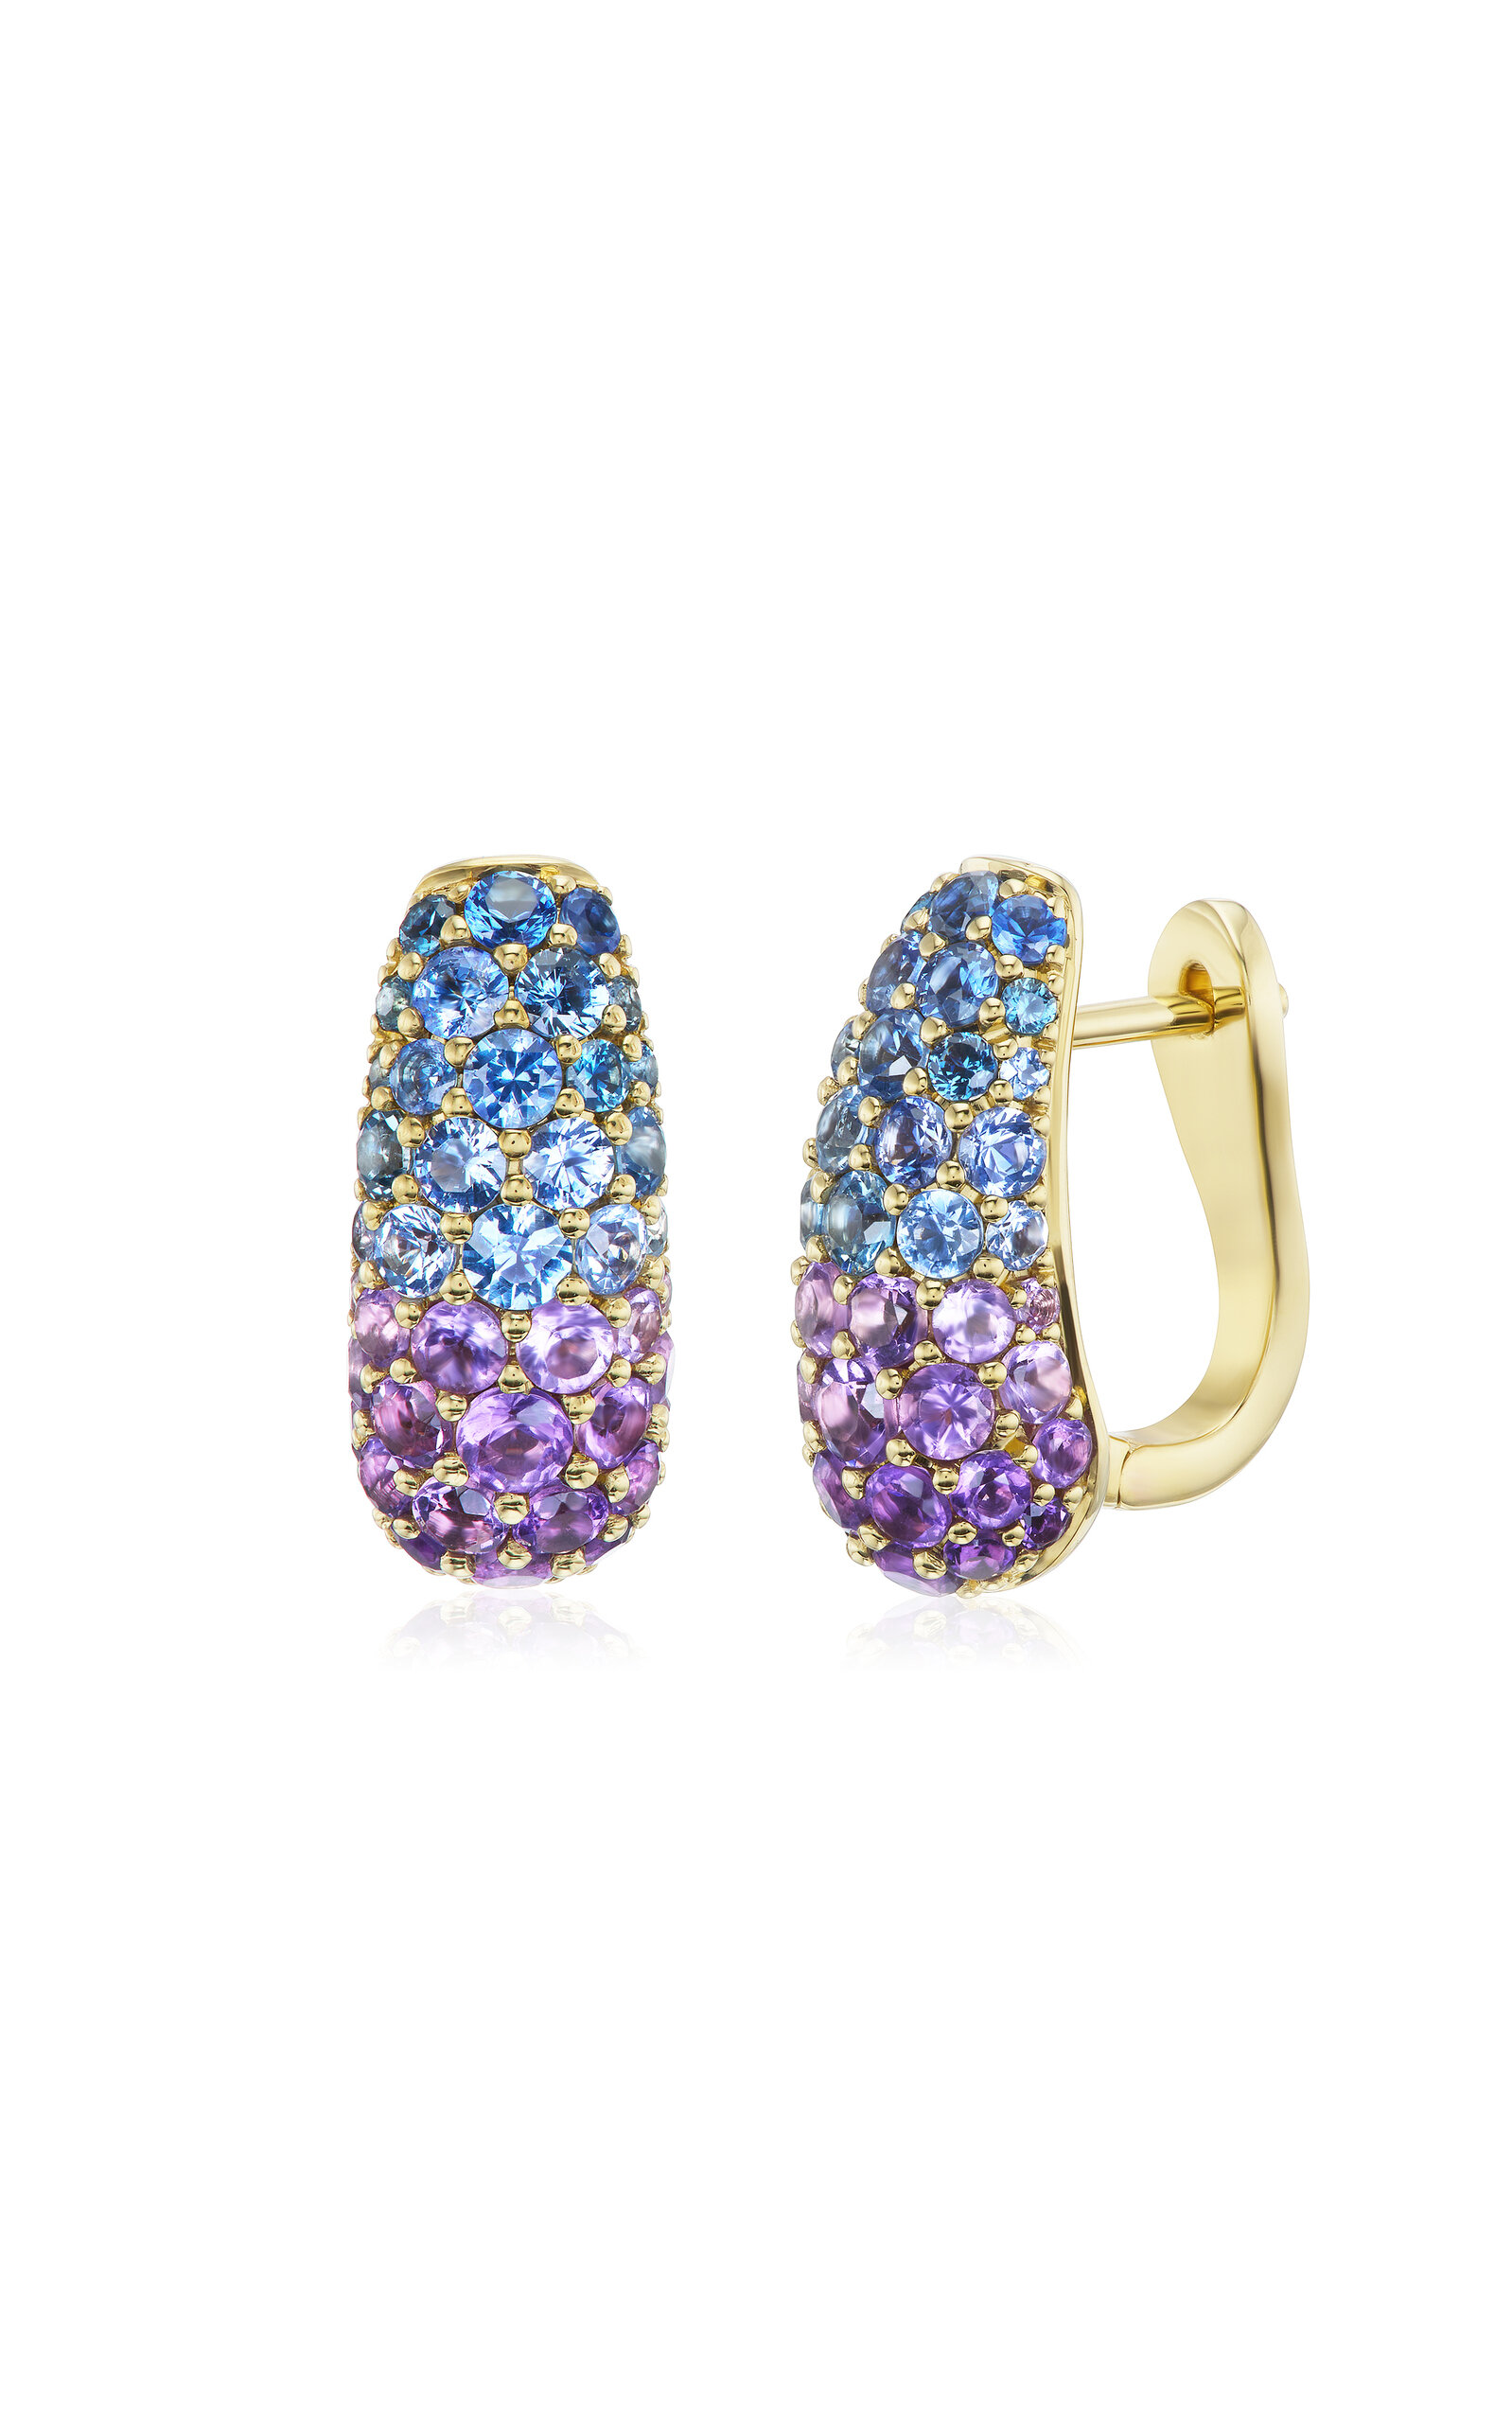 Holly Hug 18K Yellow Gold; Sapphire And Amethyst Earrings